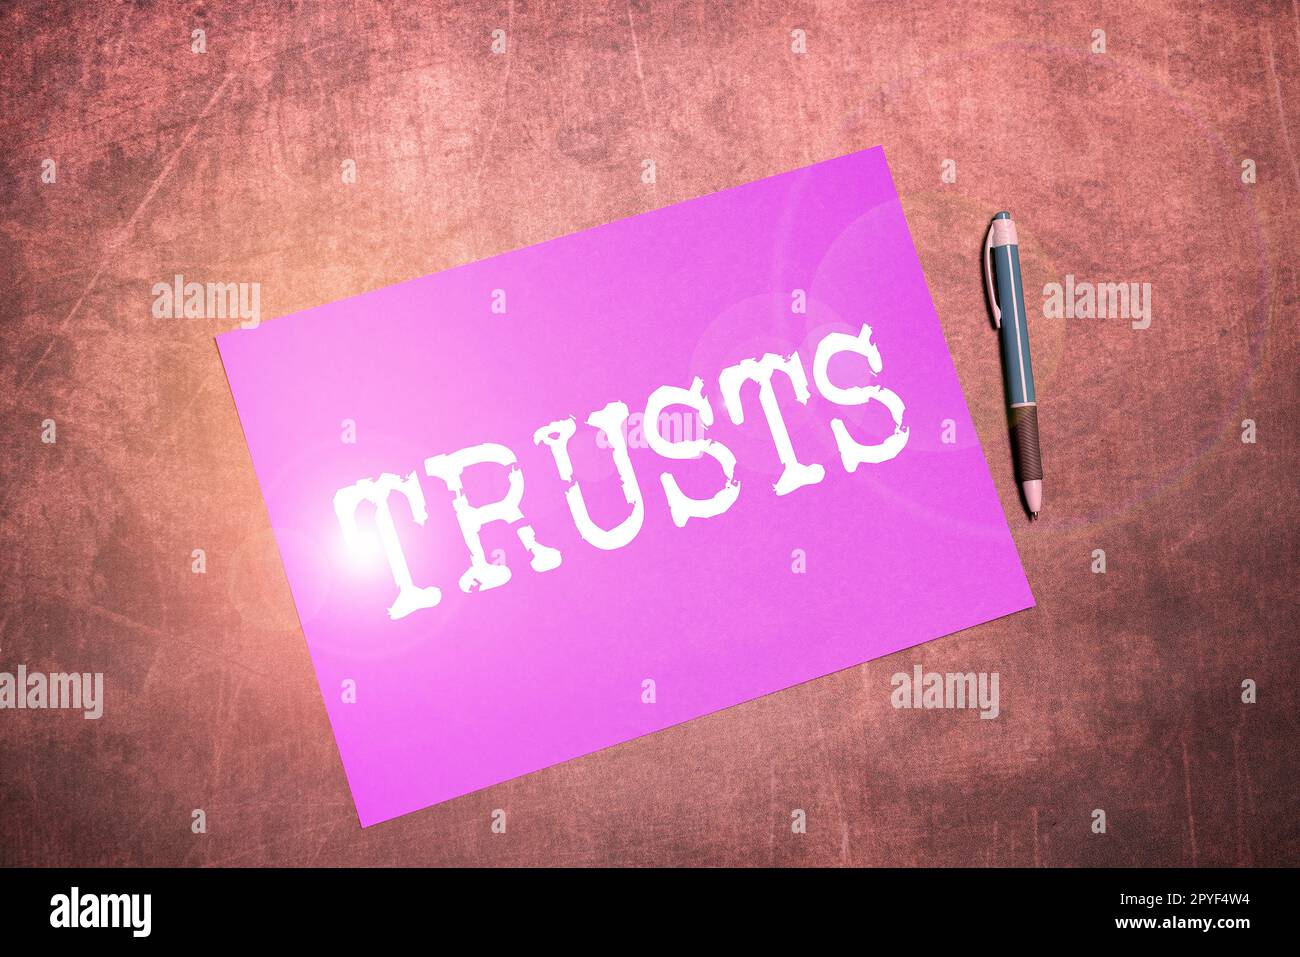 Conceptual display Trusts. Internet Concept firm belief in reliability truth or ability of someone or something Stock Photo